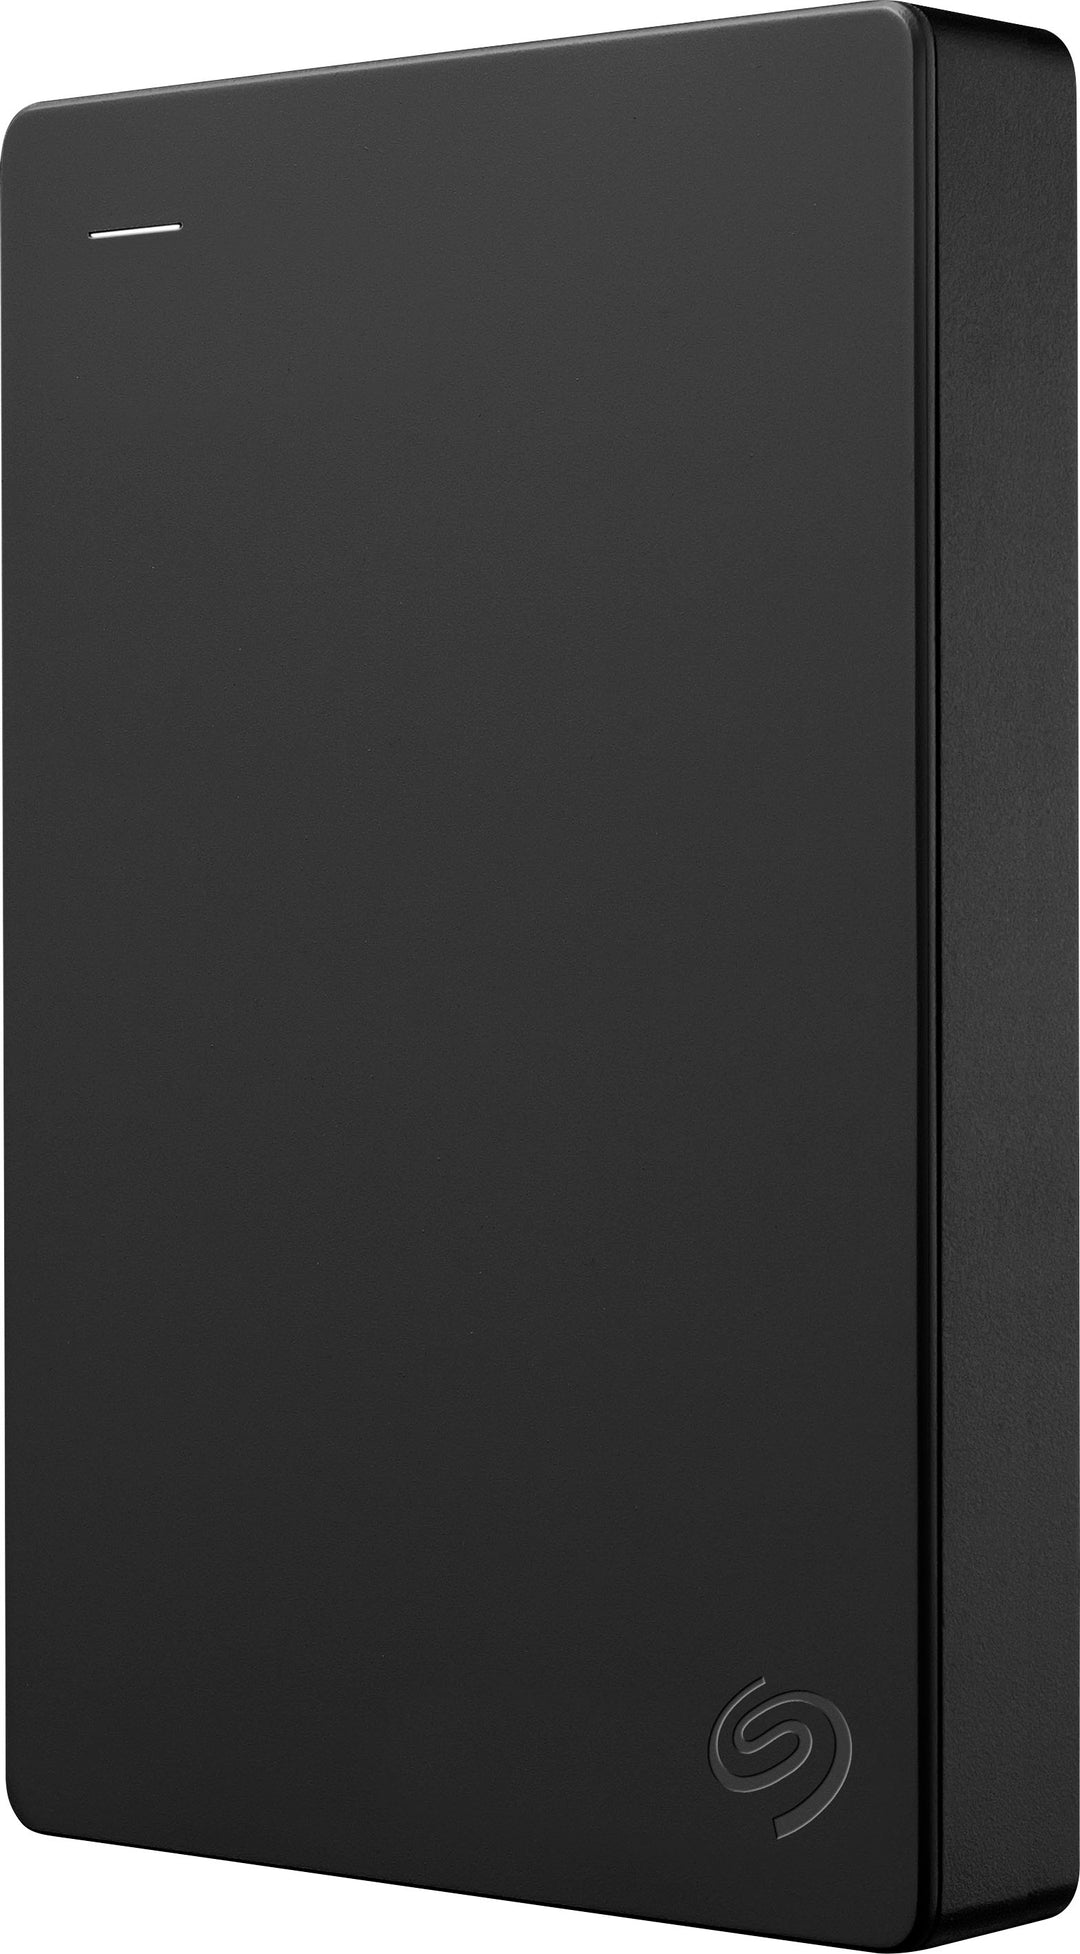 Seagate - Portable 4TB External USB 3.0 Hard Drive with Rescue Data Recovery Services - Black_0